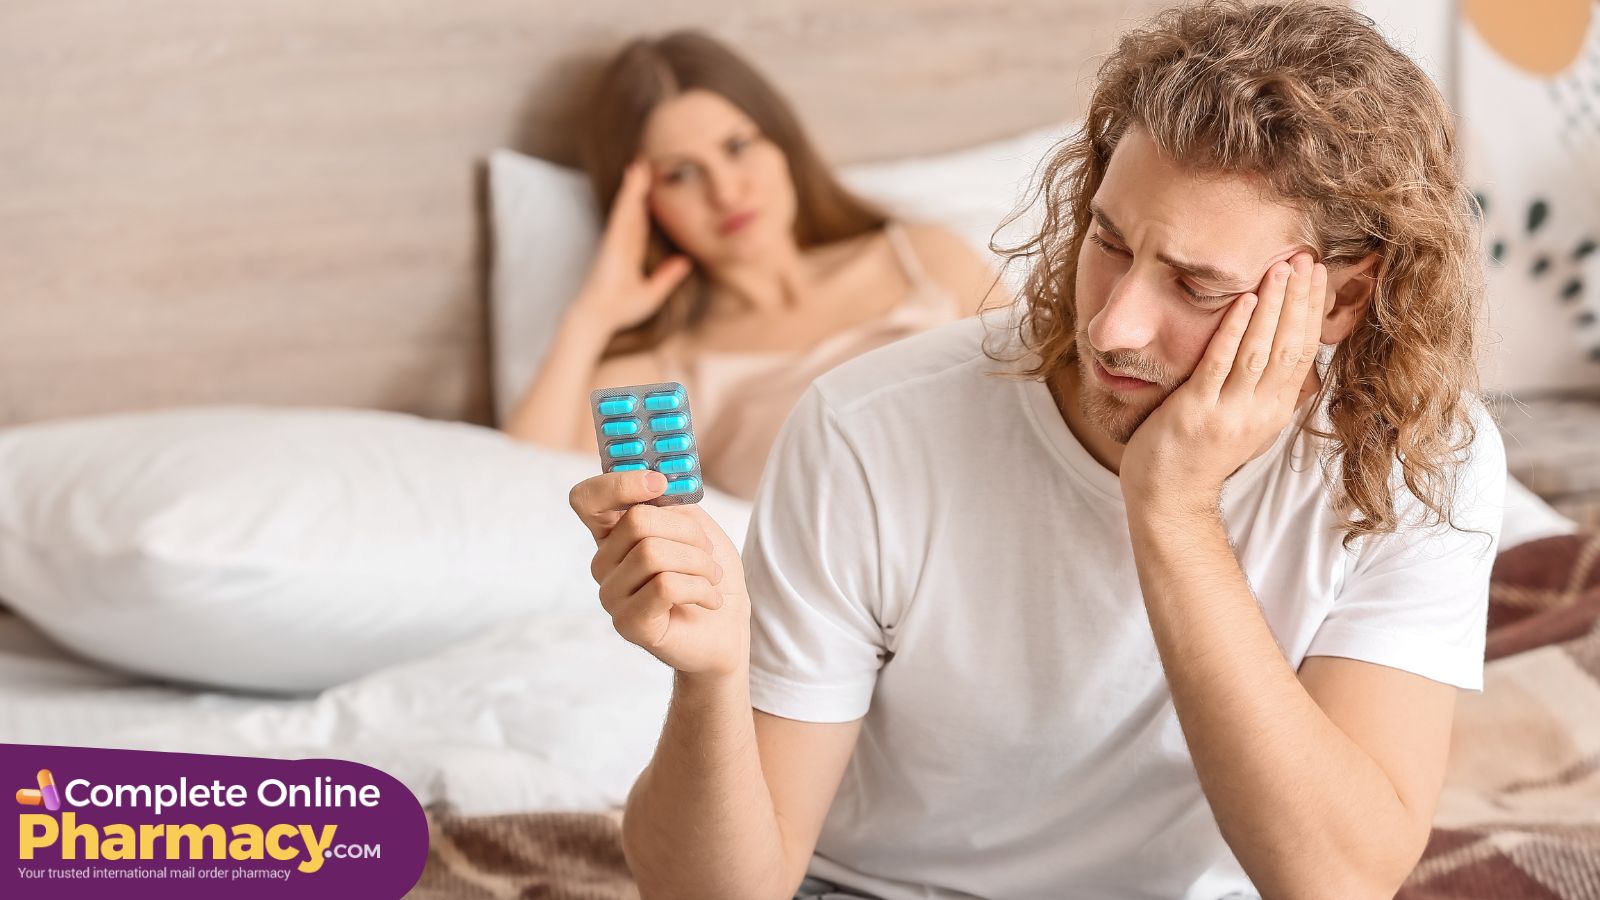 What are Erectile Dysfunction Treatment Pills and Medicines?